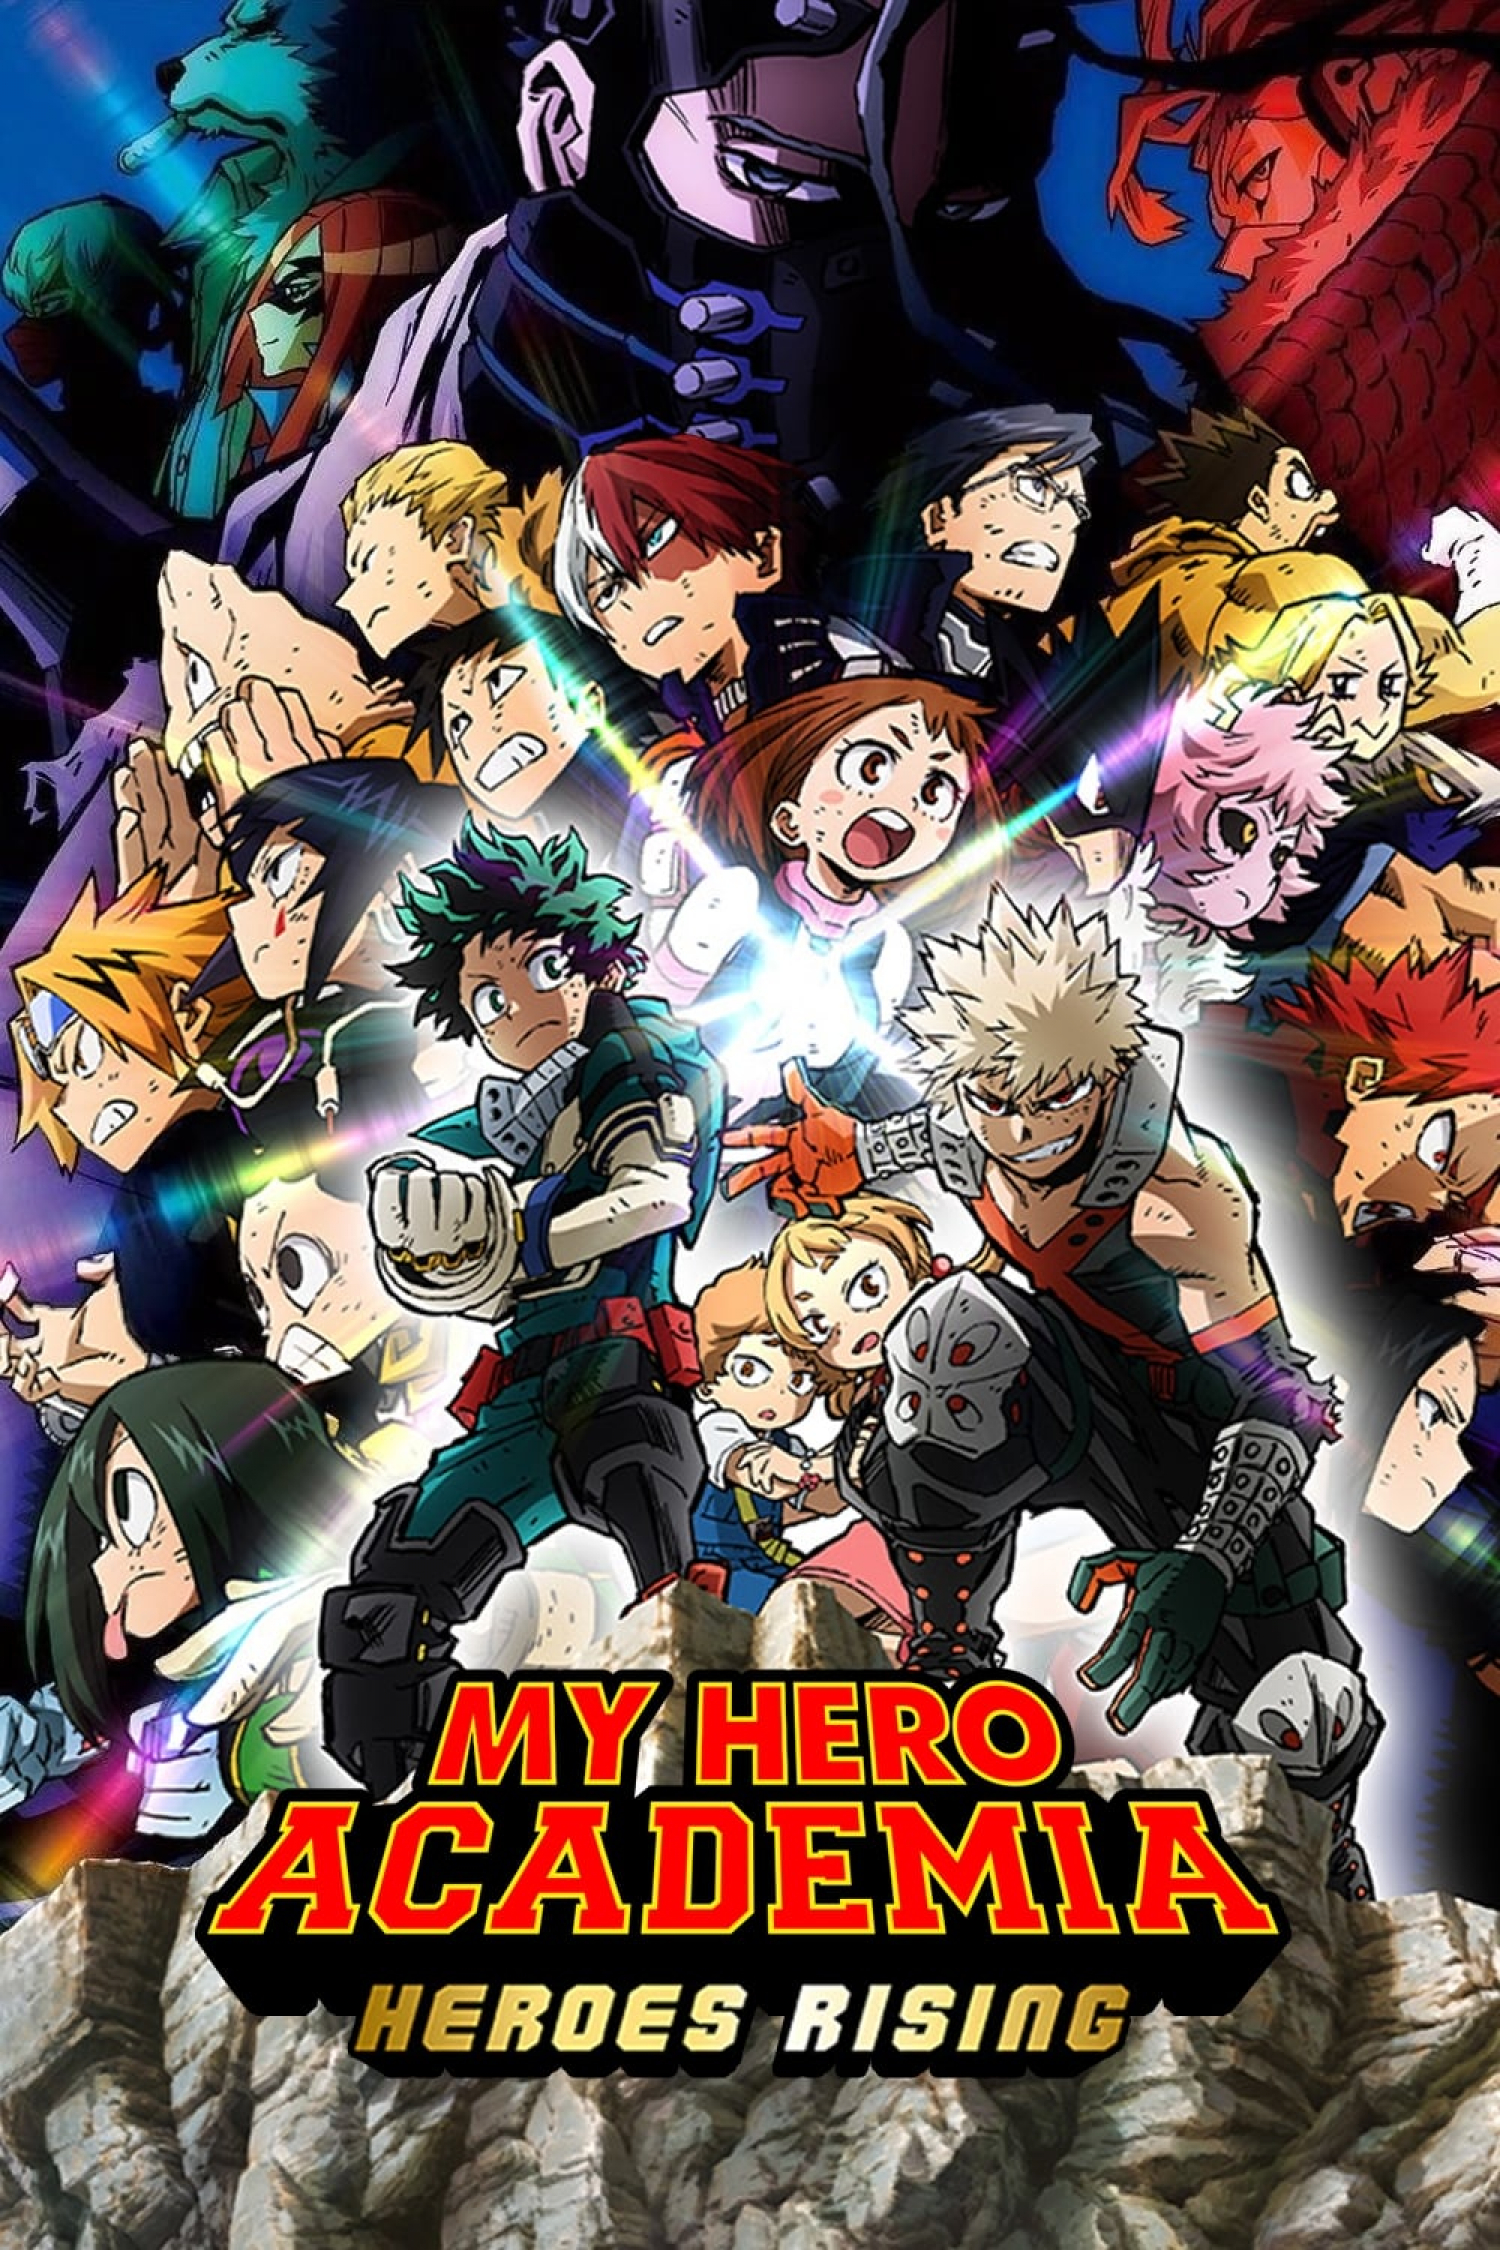 crystal mathers recommends photos of my hero academia pic